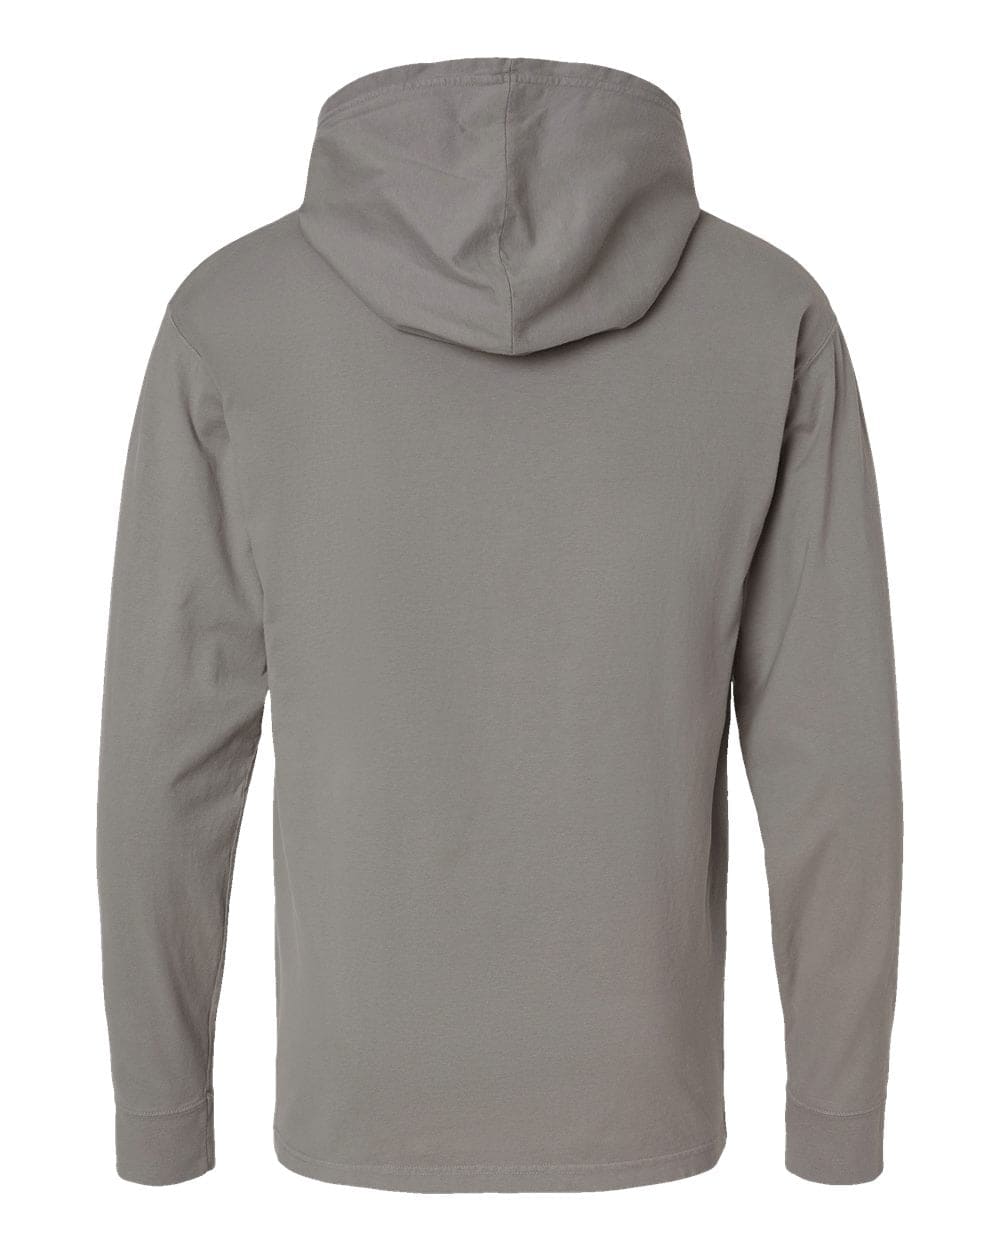 T-shirts Hooded Eco-friendly Gdh280 - Activewear / T-shirts / Hooded